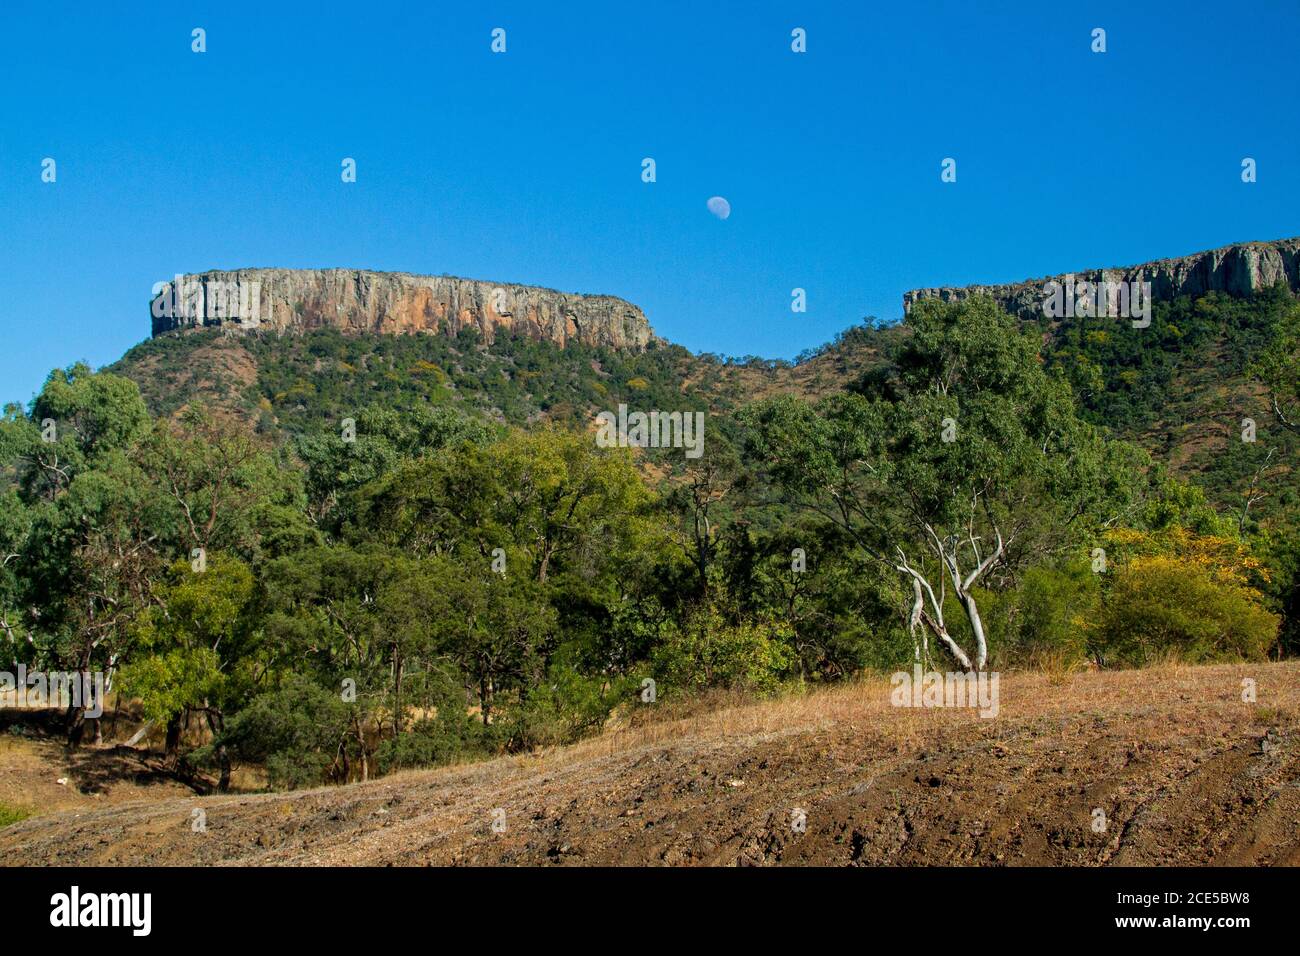 Lords Table Mountain in Peak Range National Park rising into blue sky with foreground cloaked in gum trees in outback Queensland Australia Stock Photo